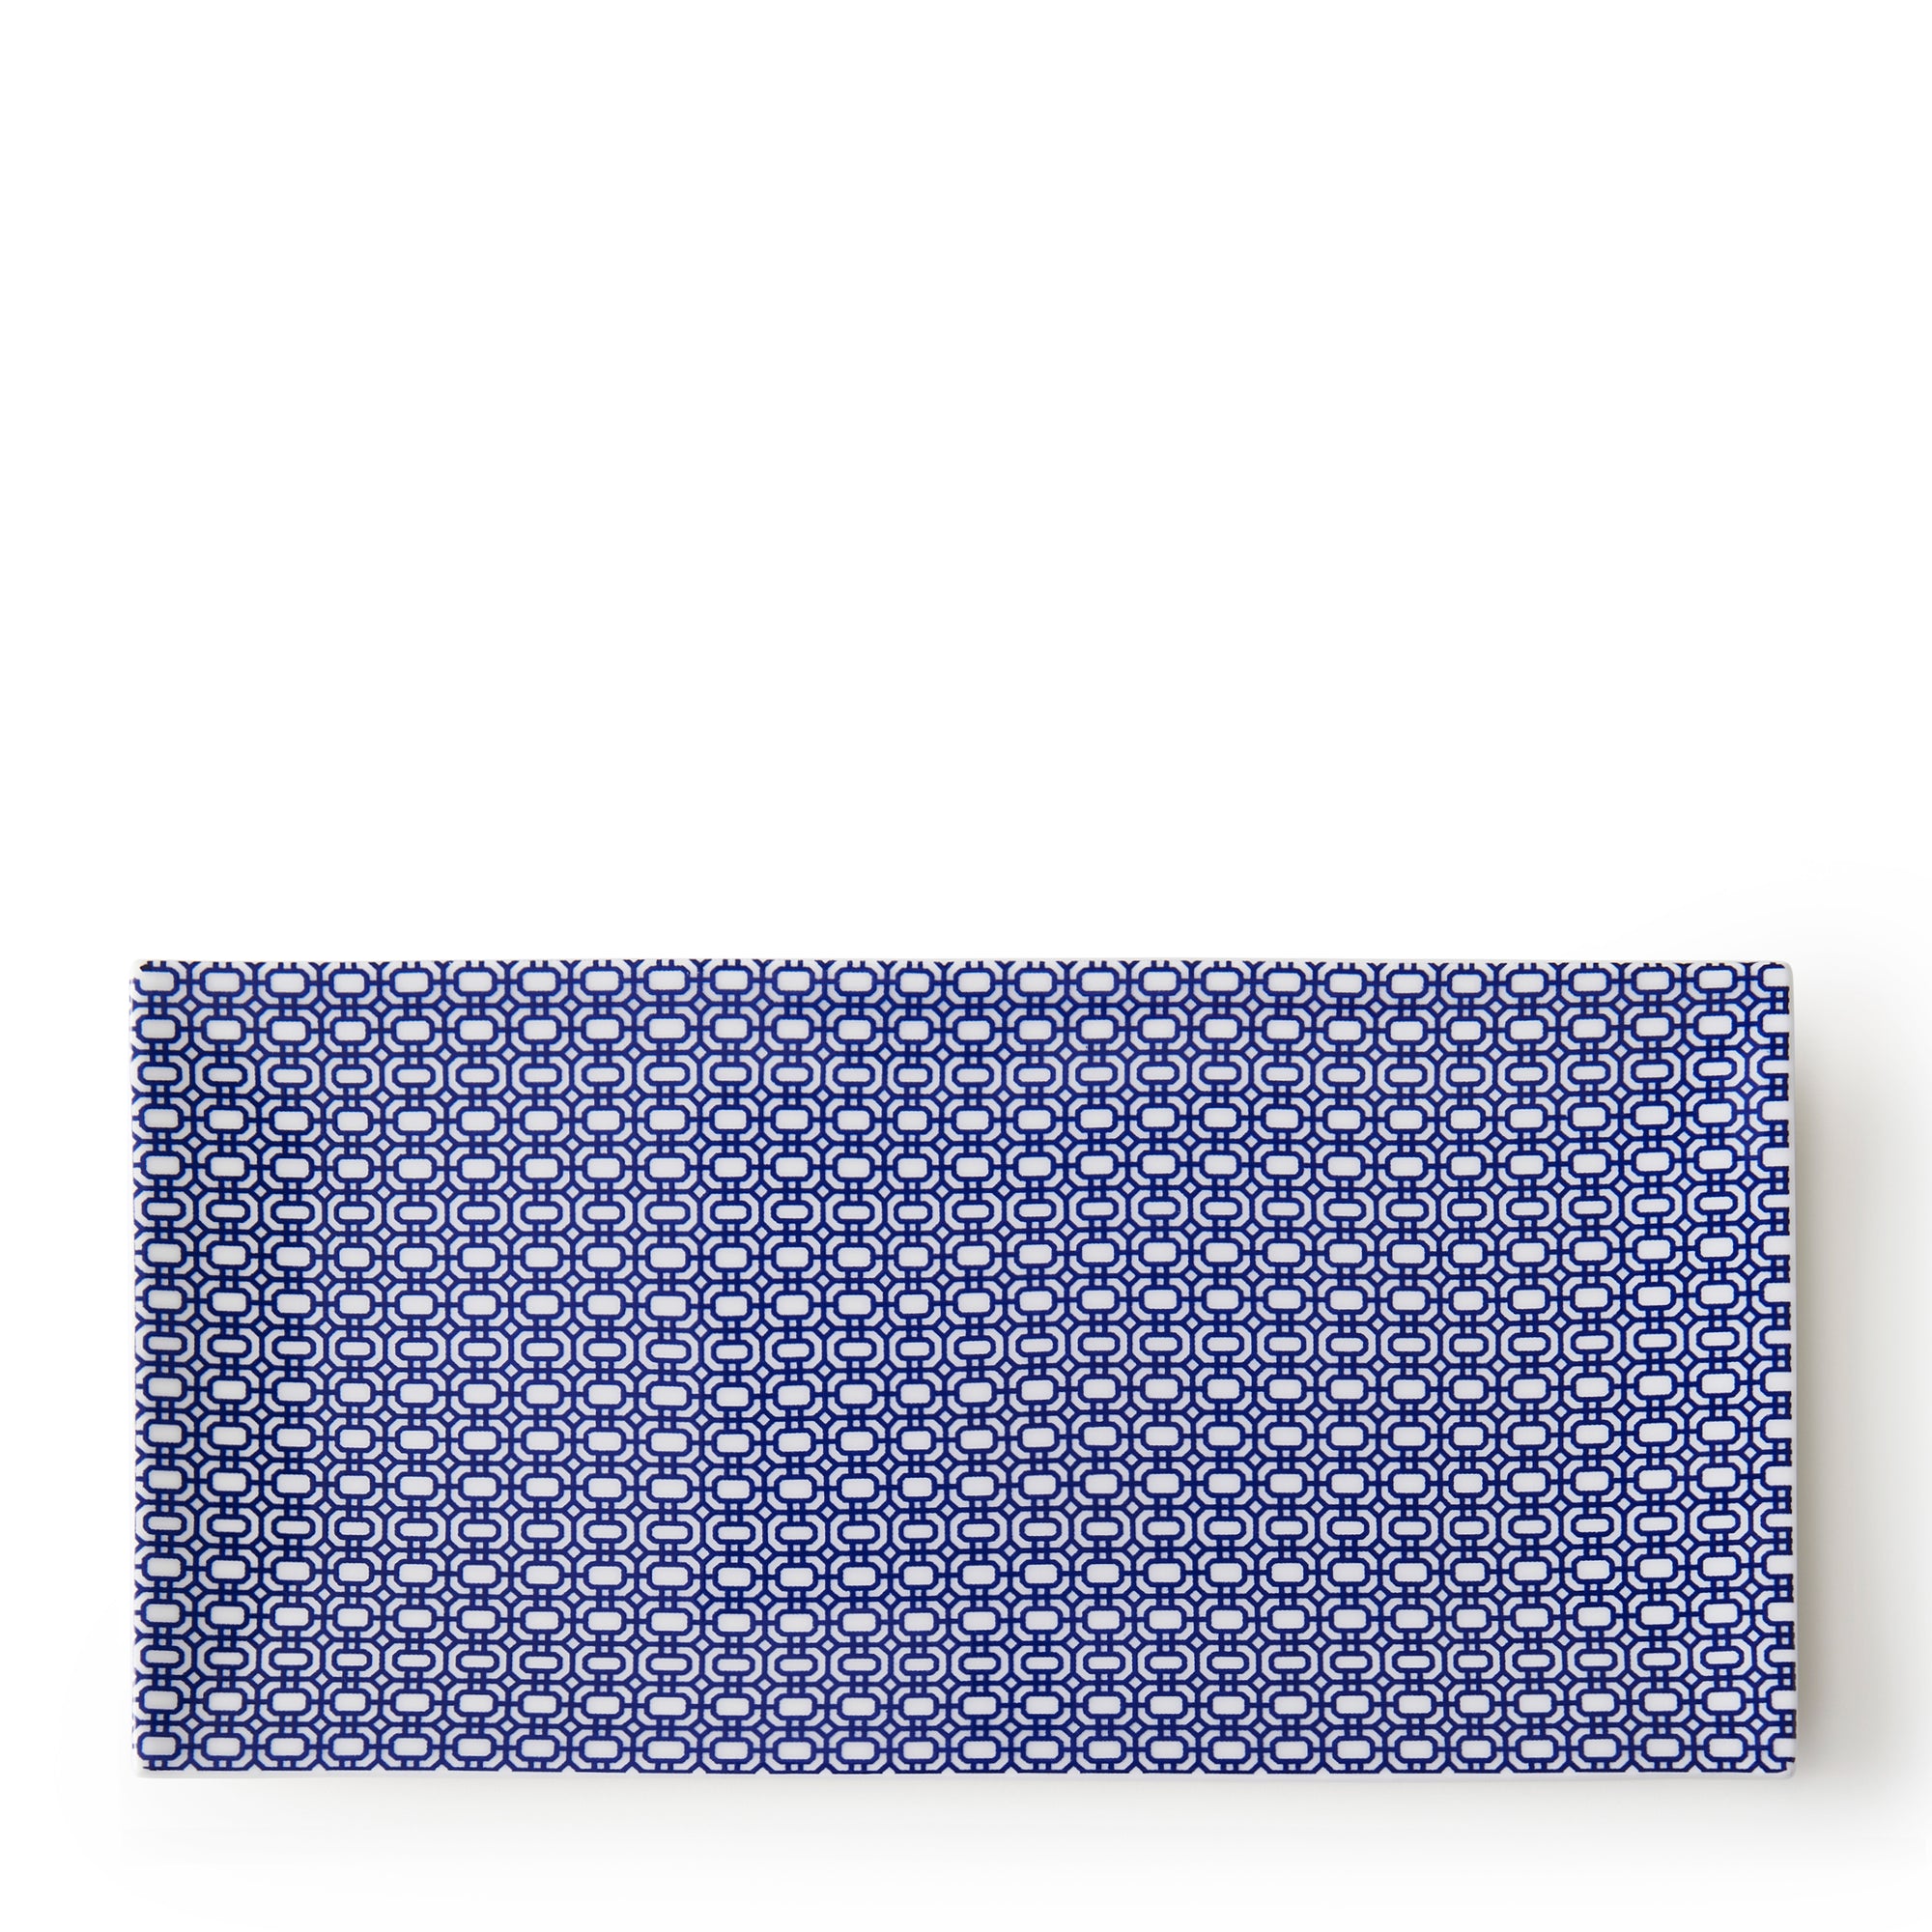 A rectangular tray featuring a repeating geometric pattern in blue and white on a plain white background, crafted from premium porcelain, the Newport Large Sushi Tray by Caskata.